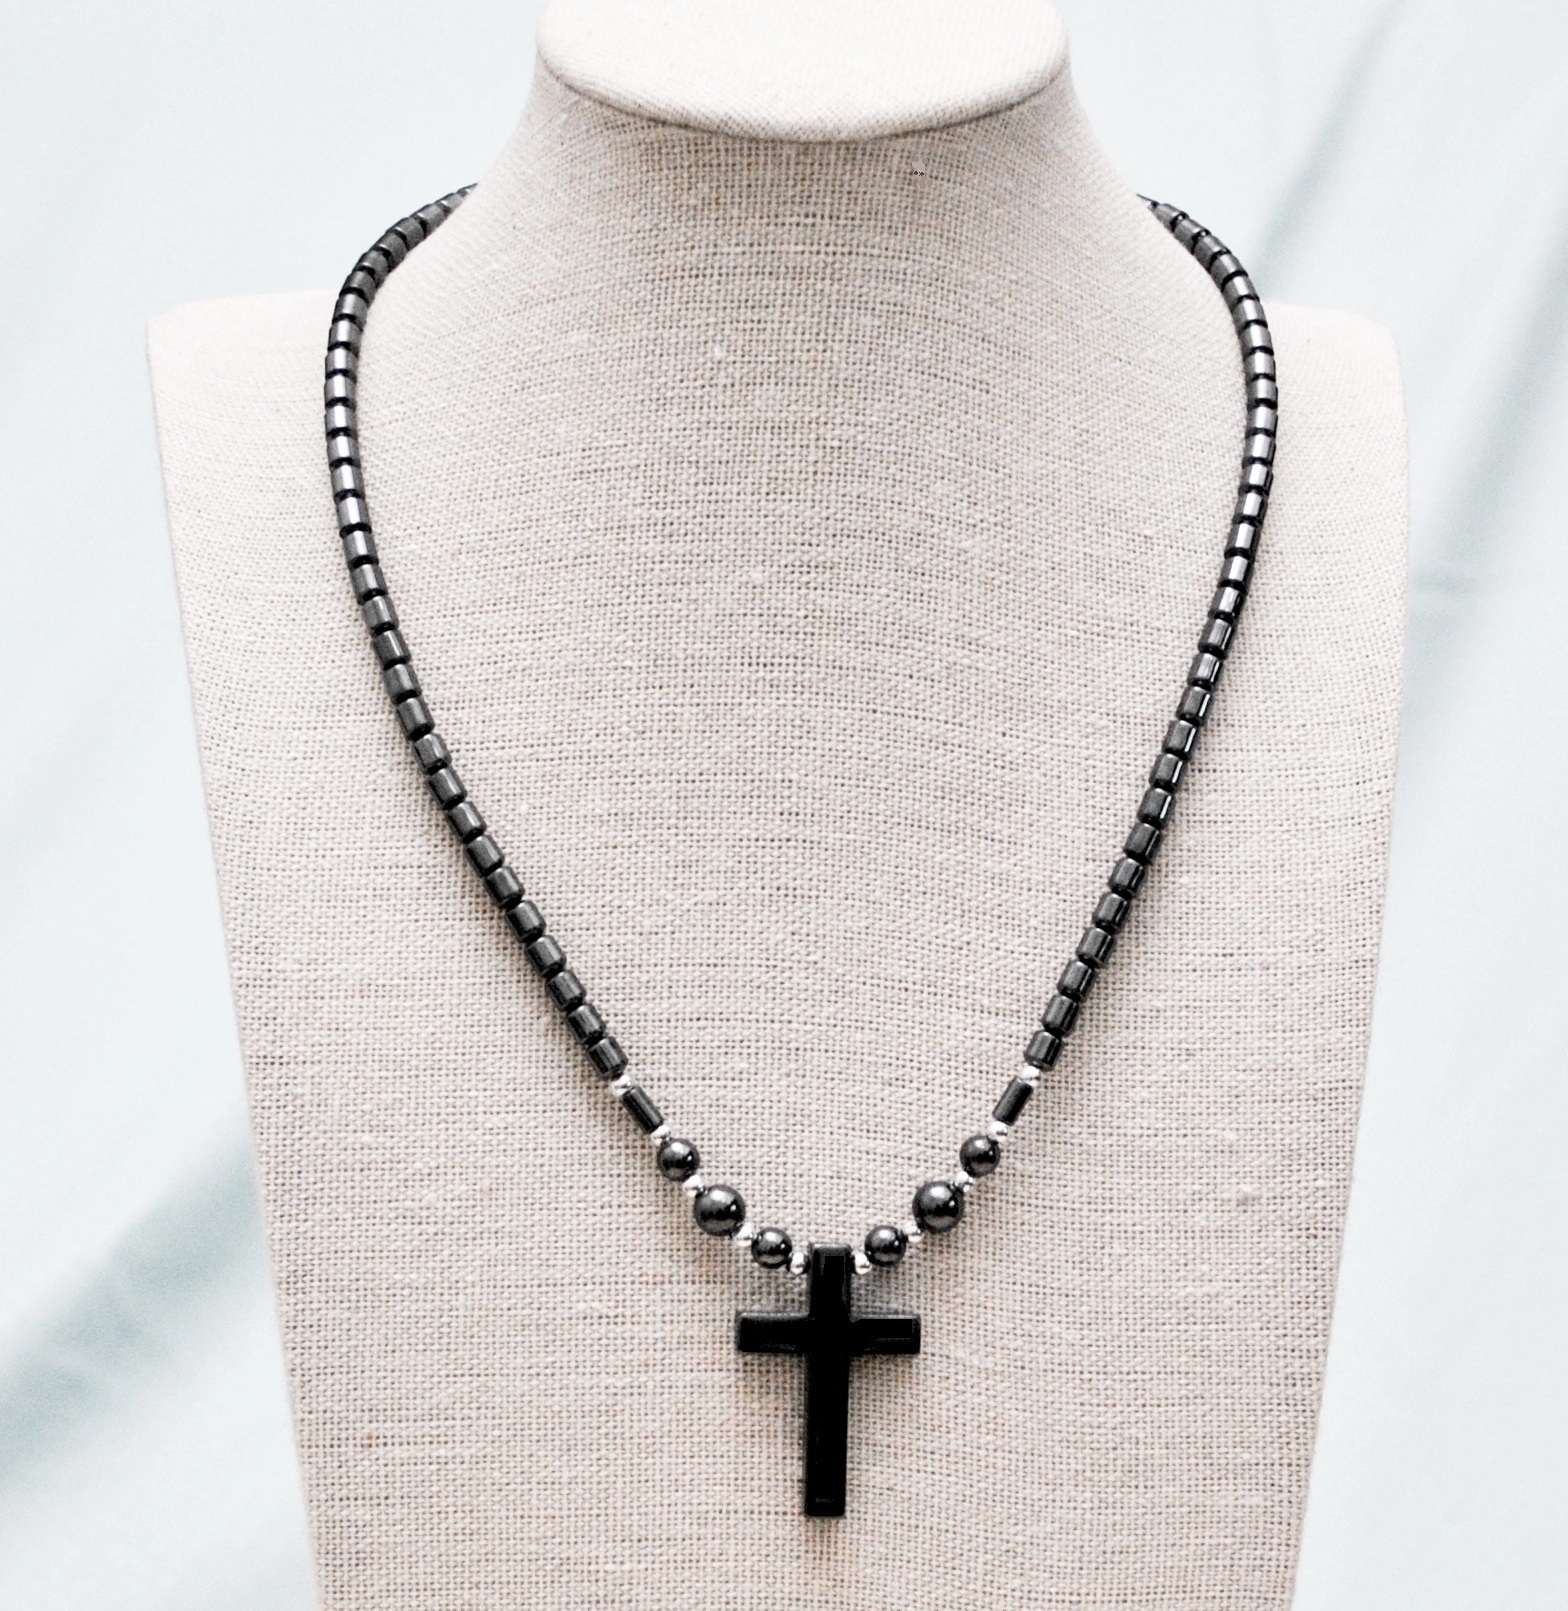 Plain Cross Hematite Necklace With Silver Beads  (NON-Magnetic) #HNN0001